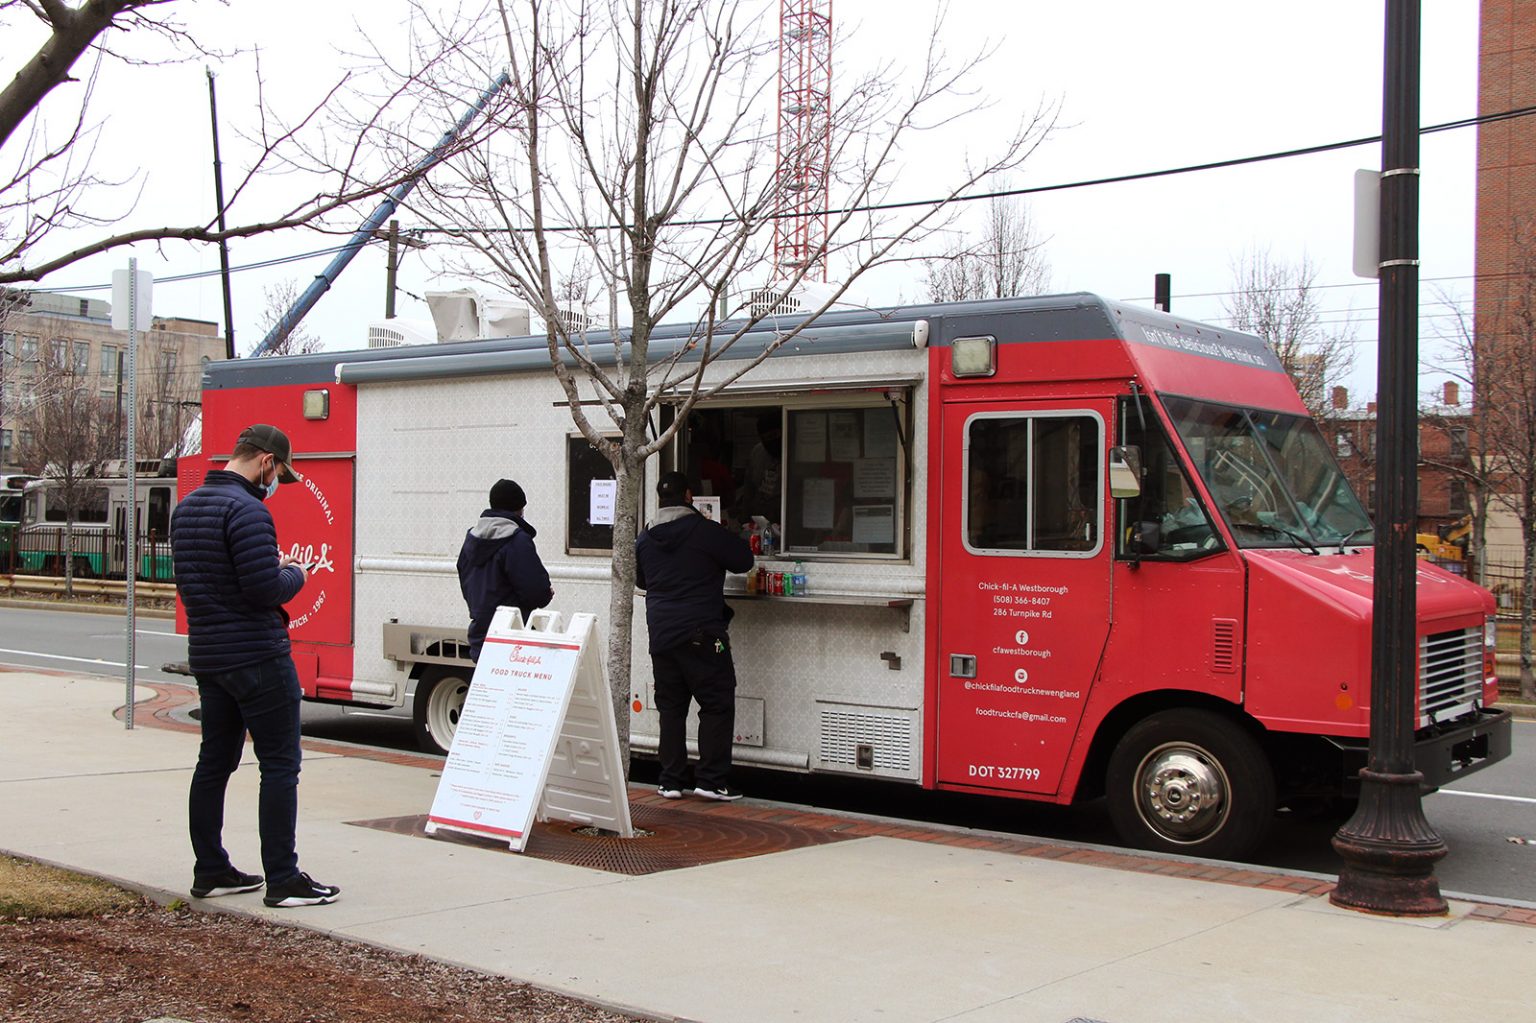 ChickfilA truck comes to Charles River Campus The Daily Free Press